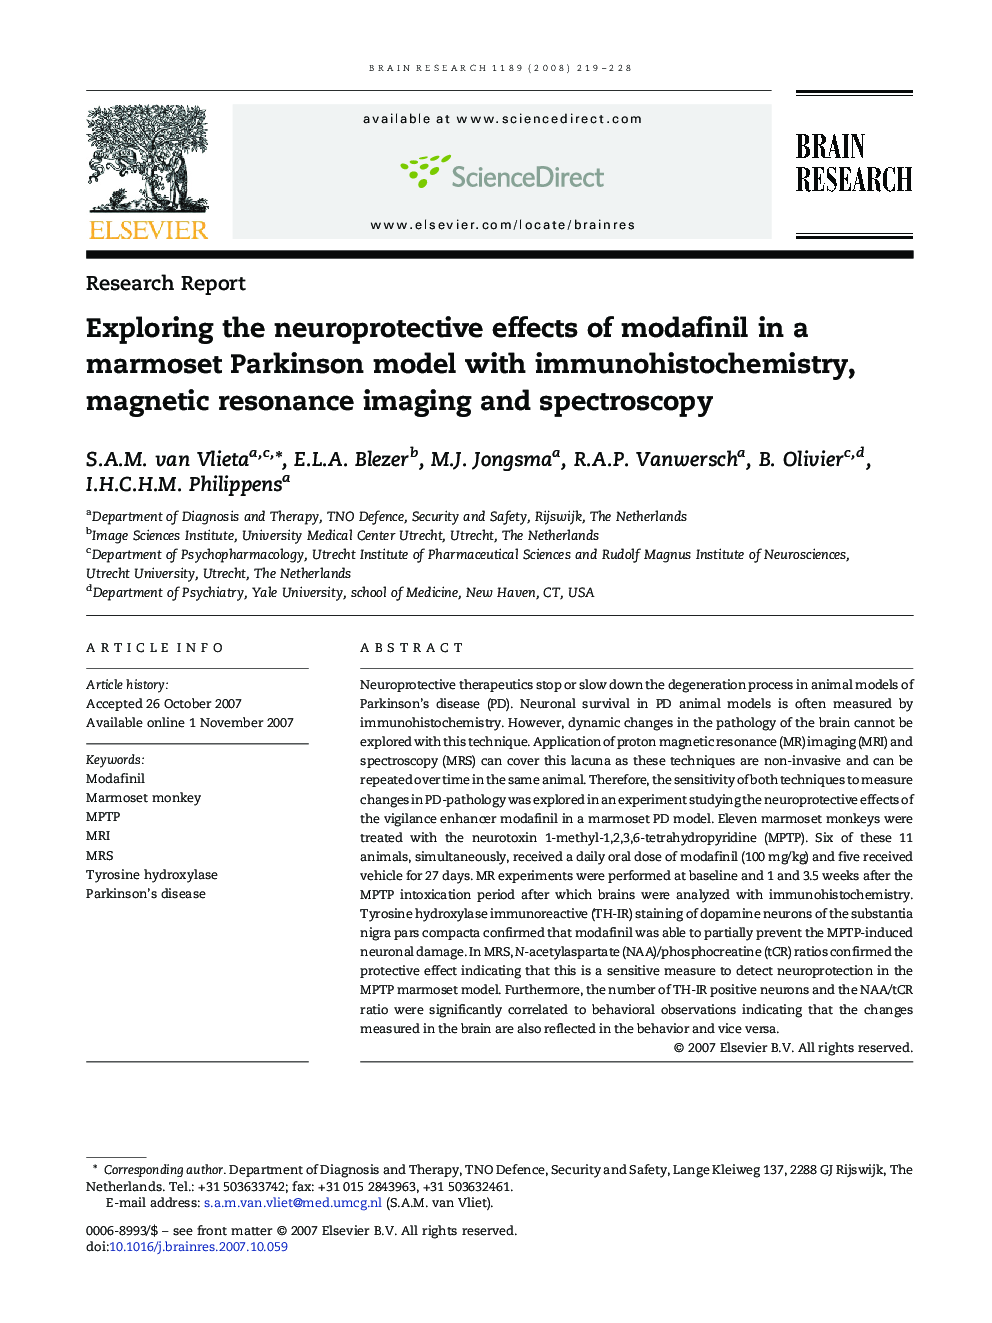 Exploring the neuroprotective effects of modafinil in a marmoset Parkinson model with immunohistochemistry, magnetic resonance imaging and spectroscopy